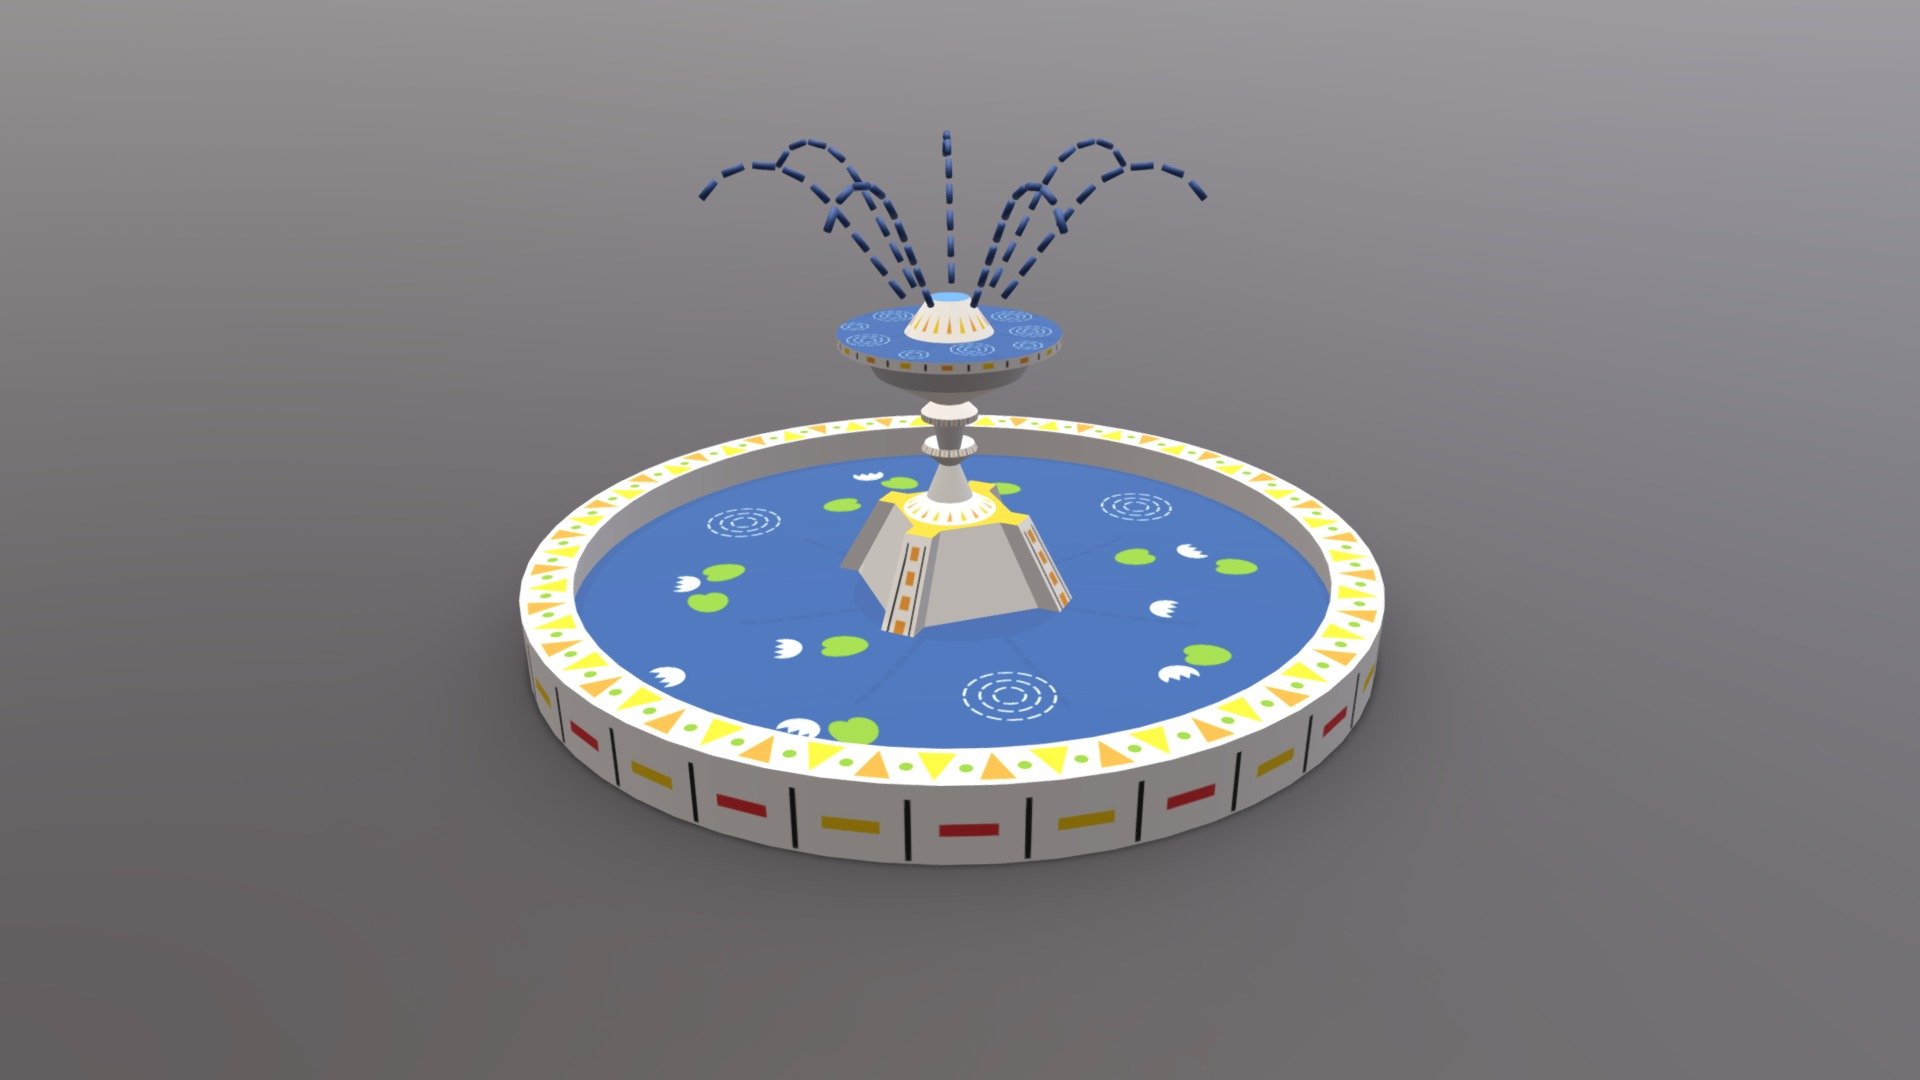 Low-poly cartoon fountain. Texture size 4096x4096. Game engine ready 3d model